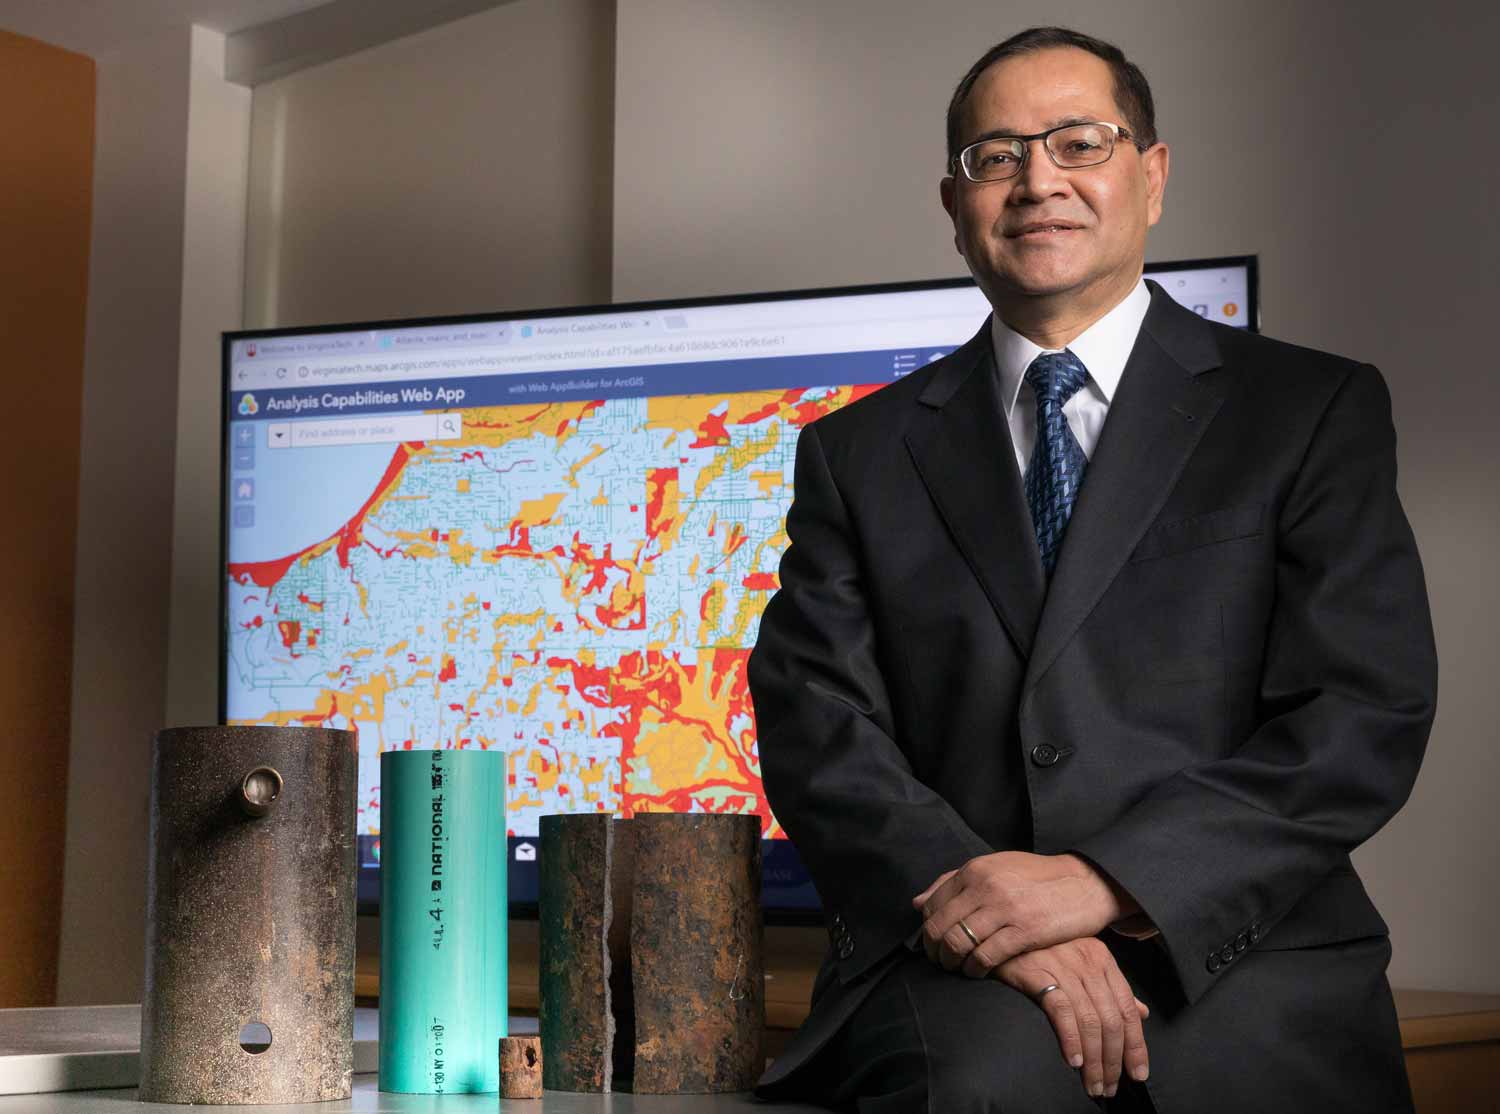 Sunhil Sinha poses with various rusty water pipe sections in front of a water map on a digital display.